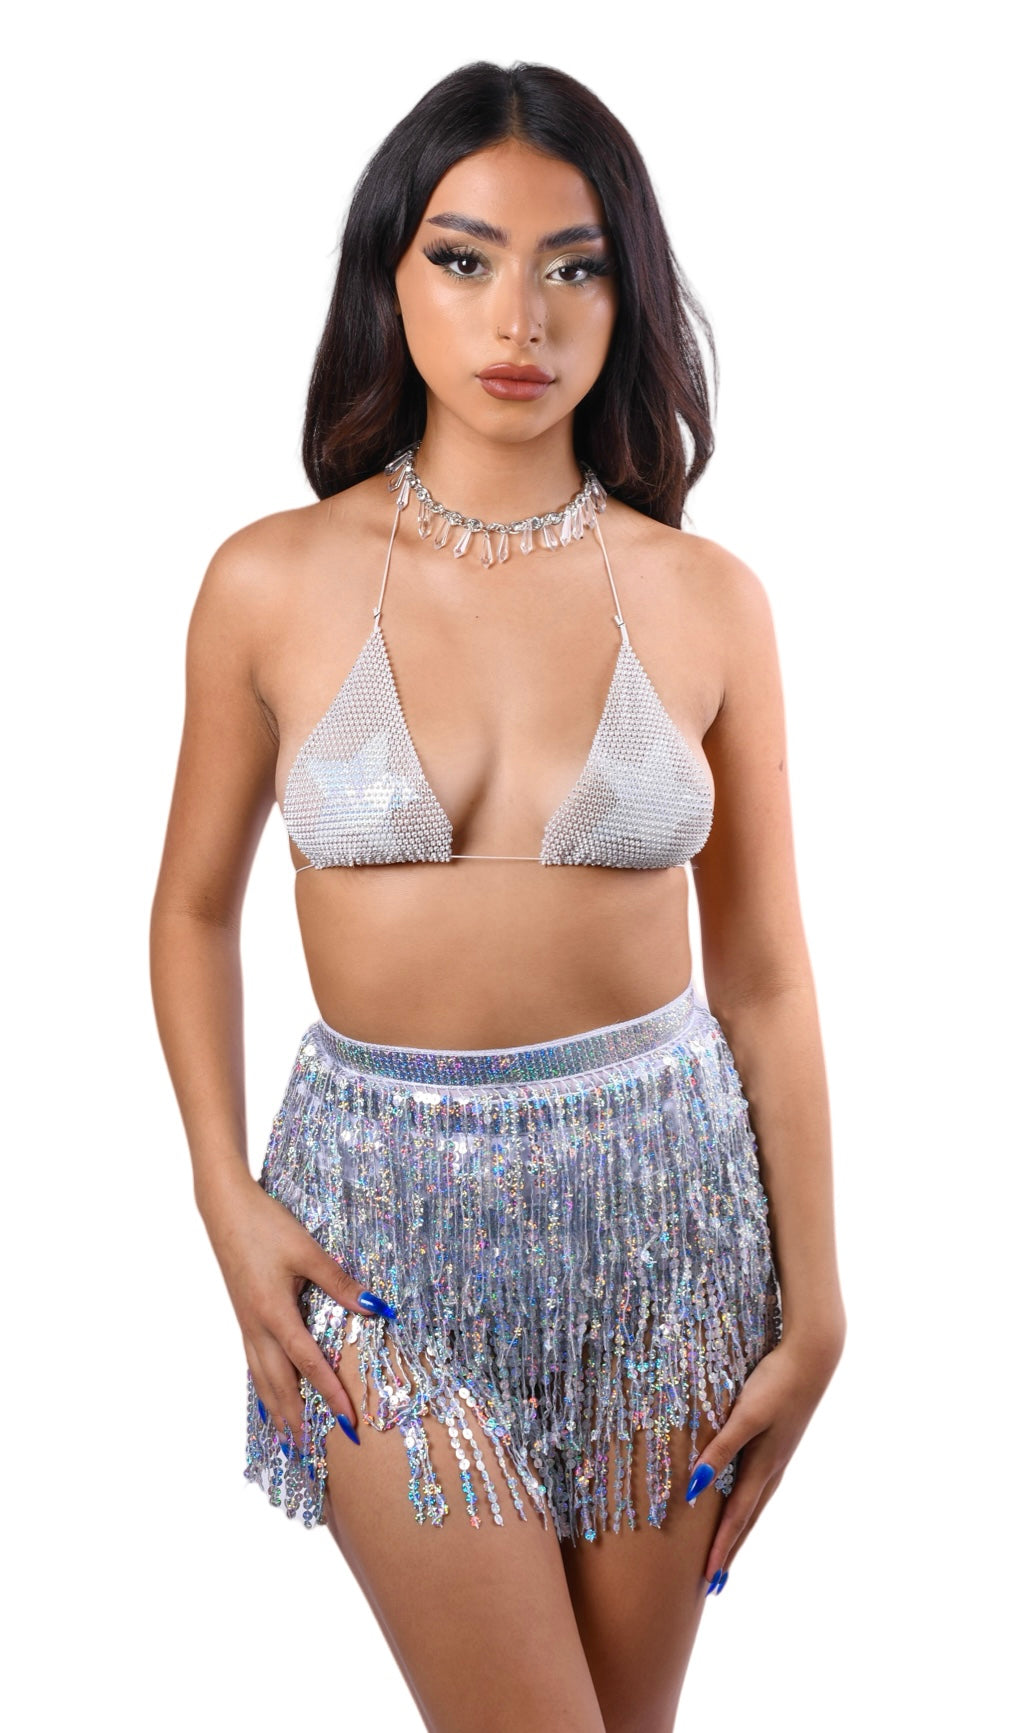 Iridescent White Crystal High Waisted Pastie and Panty Set - Like A Kitten